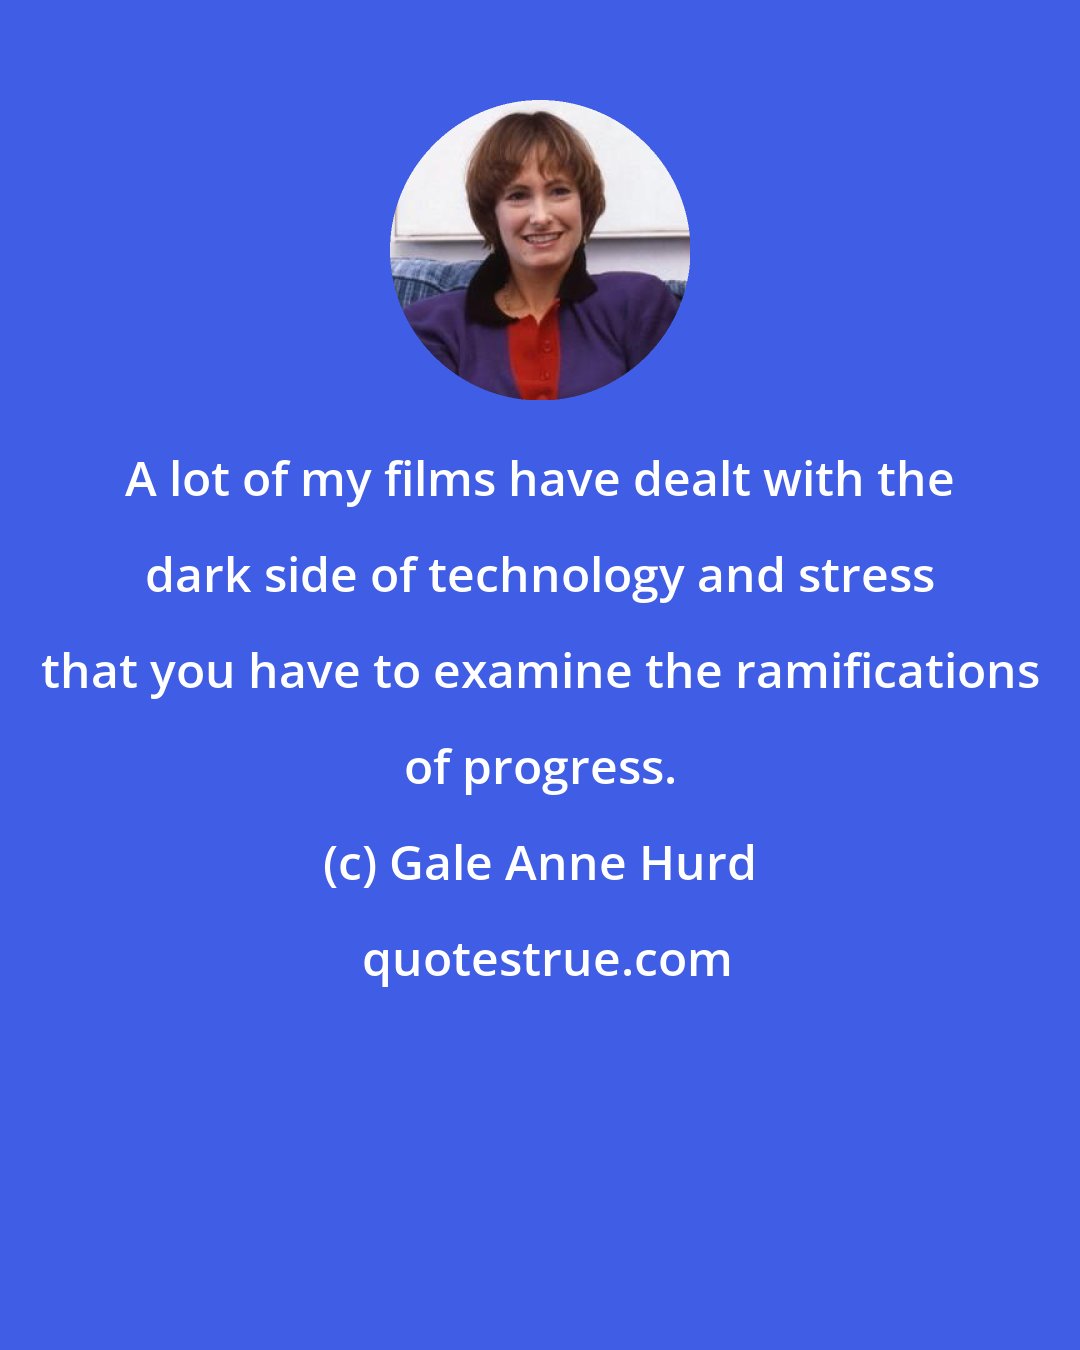 Gale Anne Hurd: A lot of my films have dealt with the dark side of technology and stress that you have to examine the ramifications of progress.